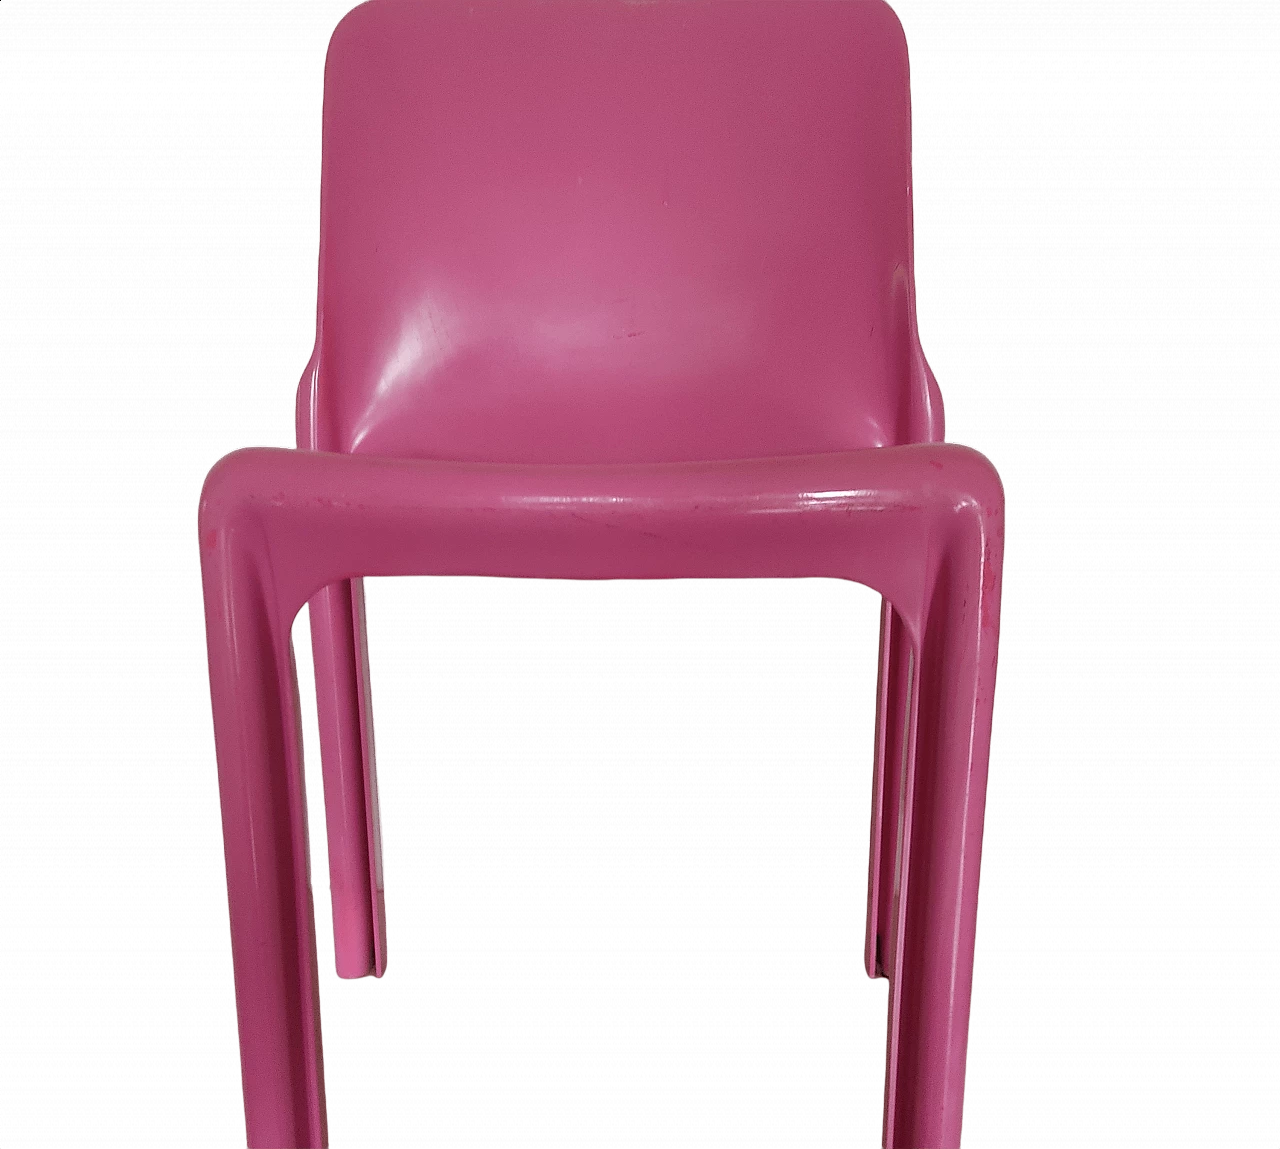 Selene pink chair by Vico Magistretti for Artemide, 1984 1370781